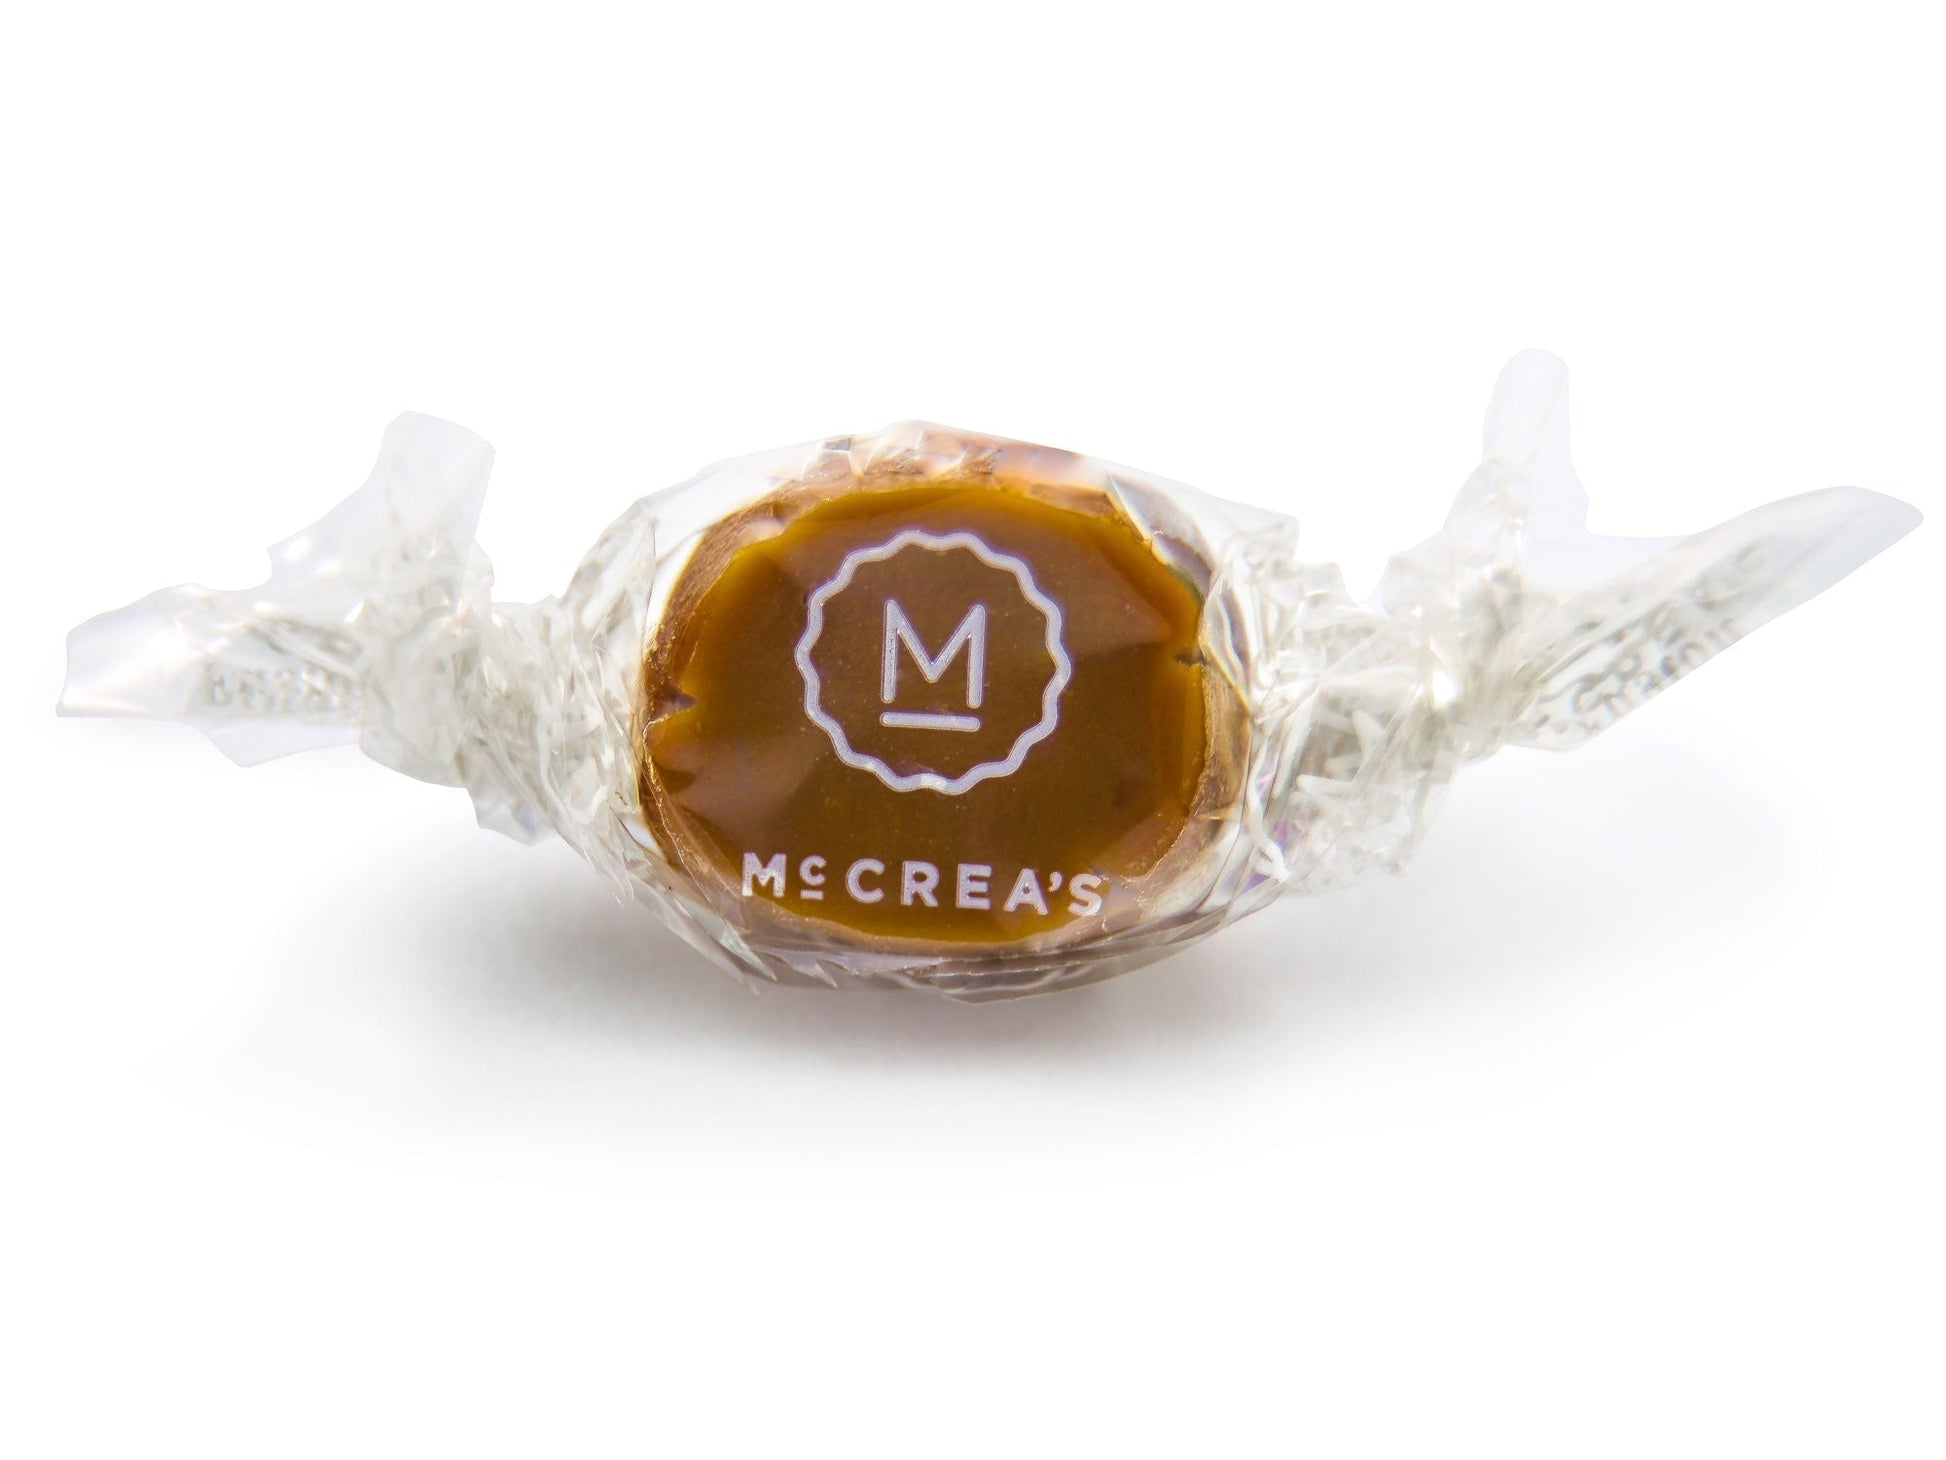 Peppermint Caramels By Mccrea's - Unboxme